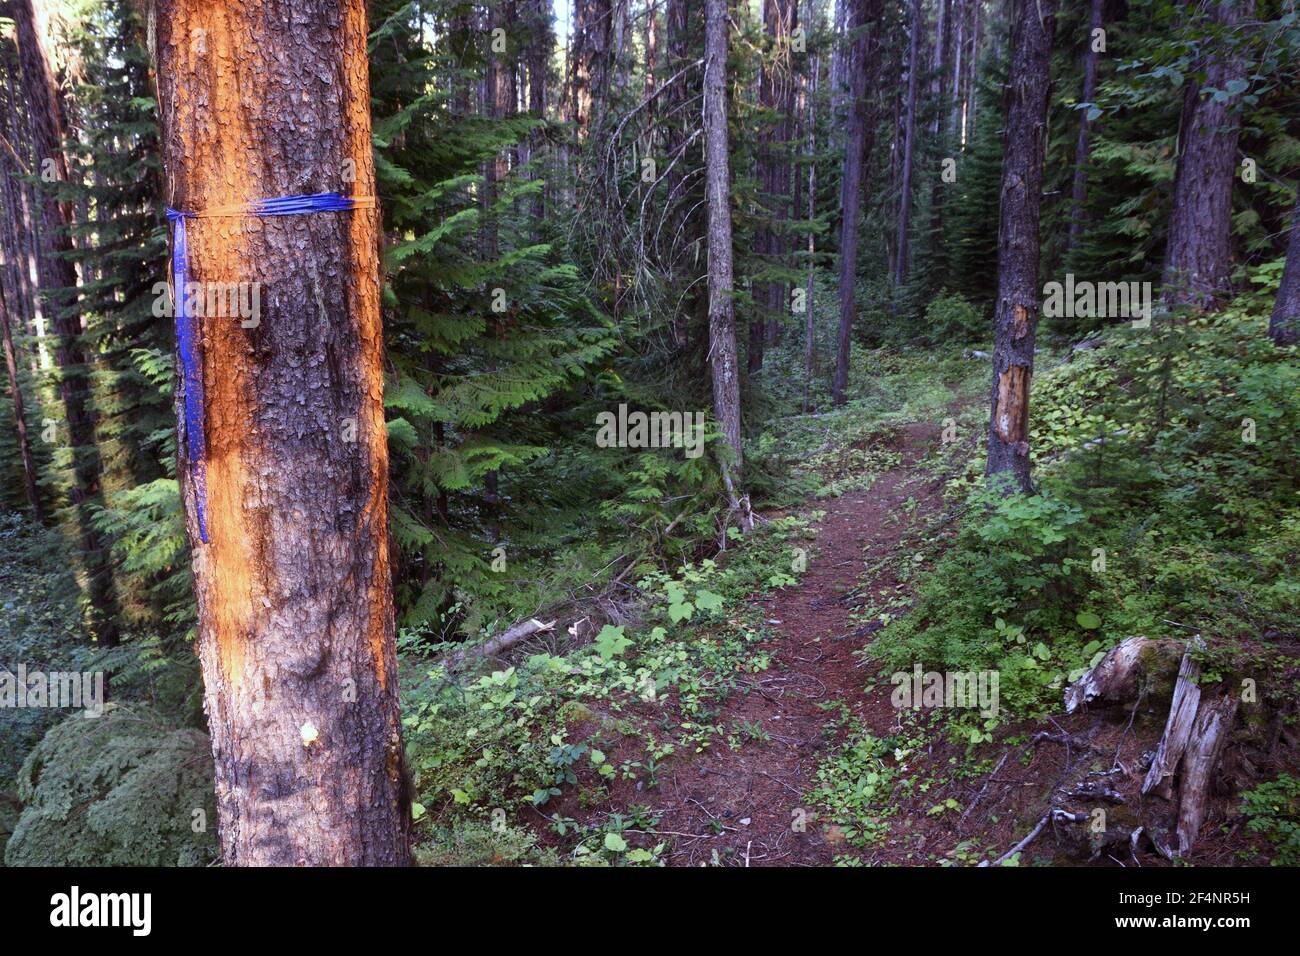 Logging unit marked along Bonnet Top Trail in the proposed Black Ram project. Kootenai National Forest, MT. (Photo by Randy Beacham) Stock Photo